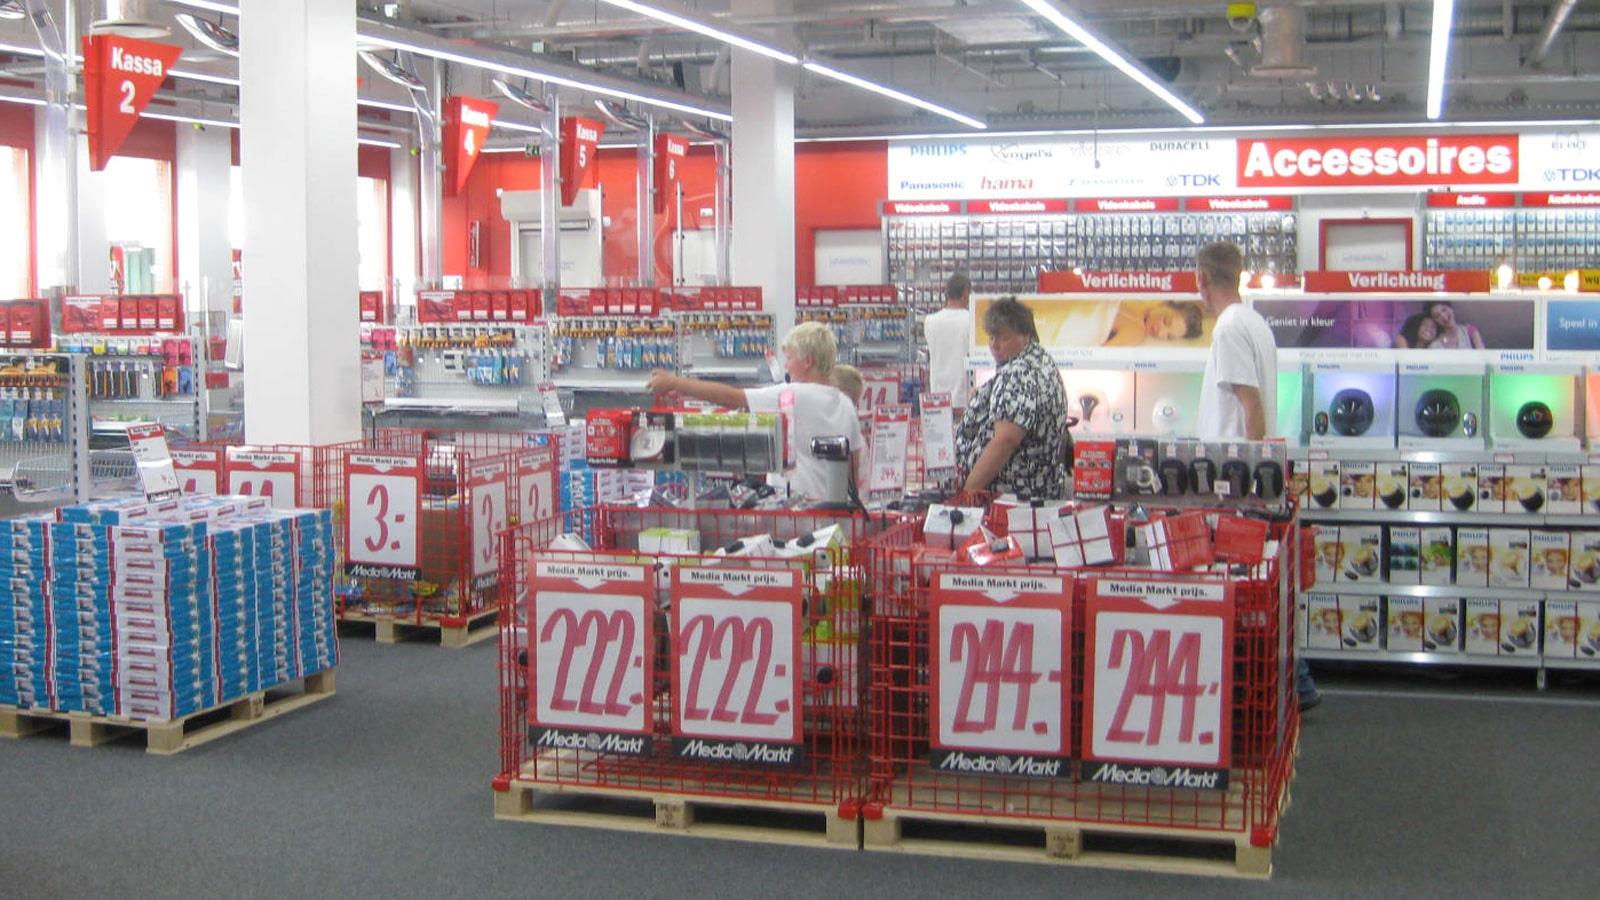 Media Markt increased recycling by compaction